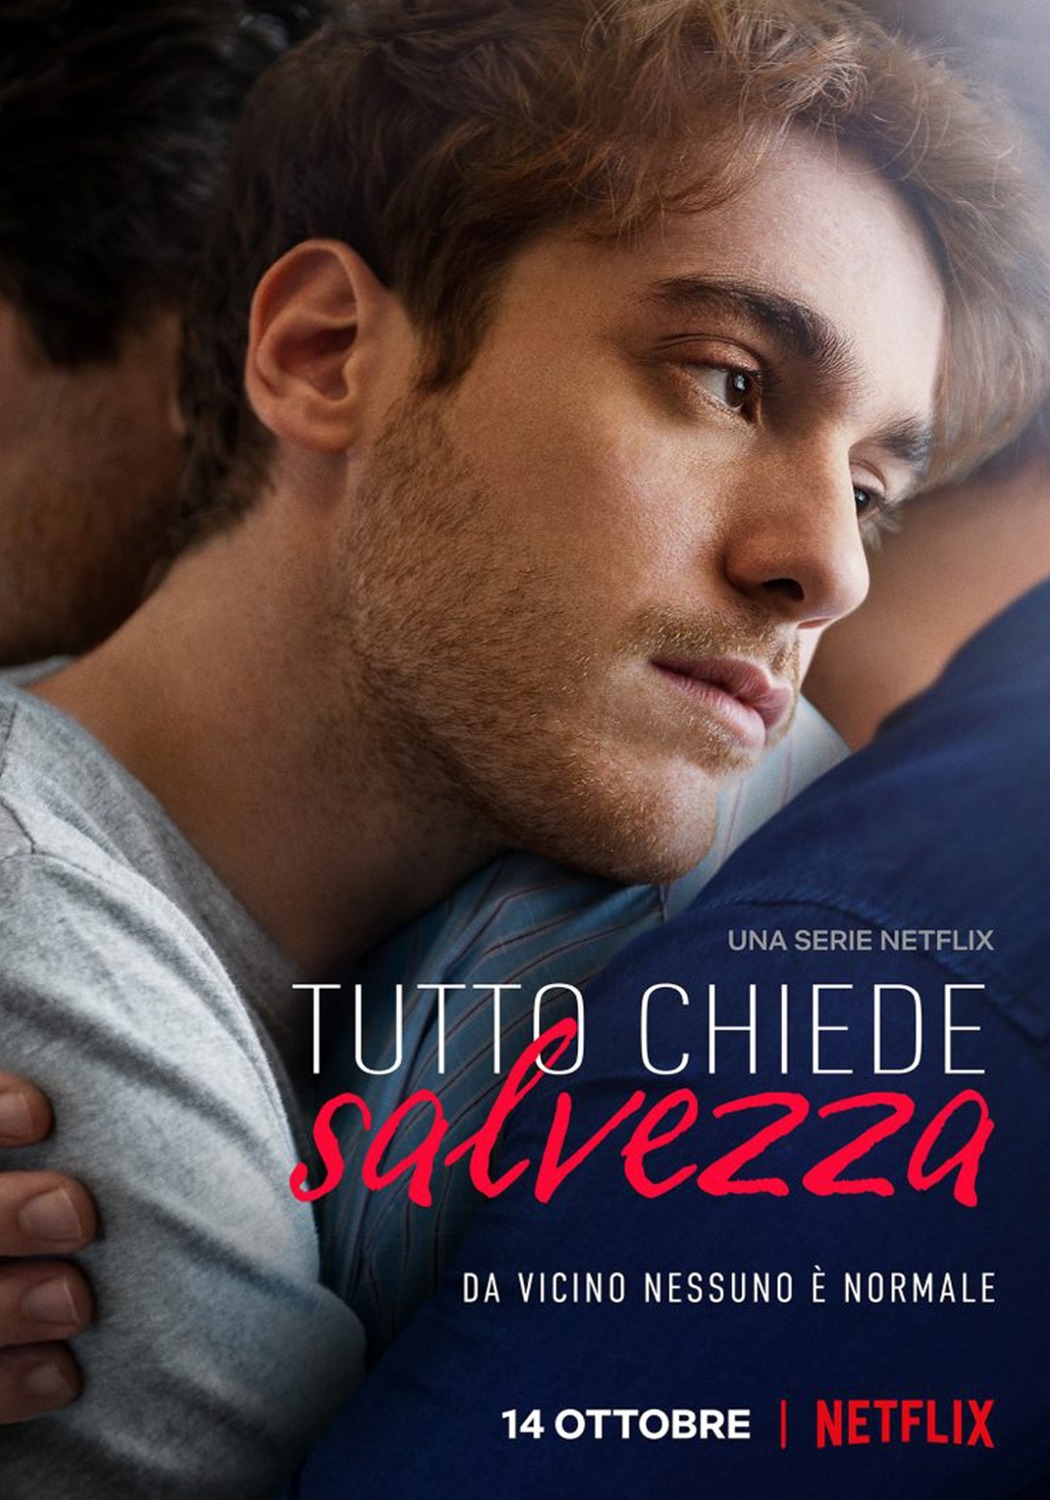 Extra Large TV Poster Image for Tutto chiede salvezza 